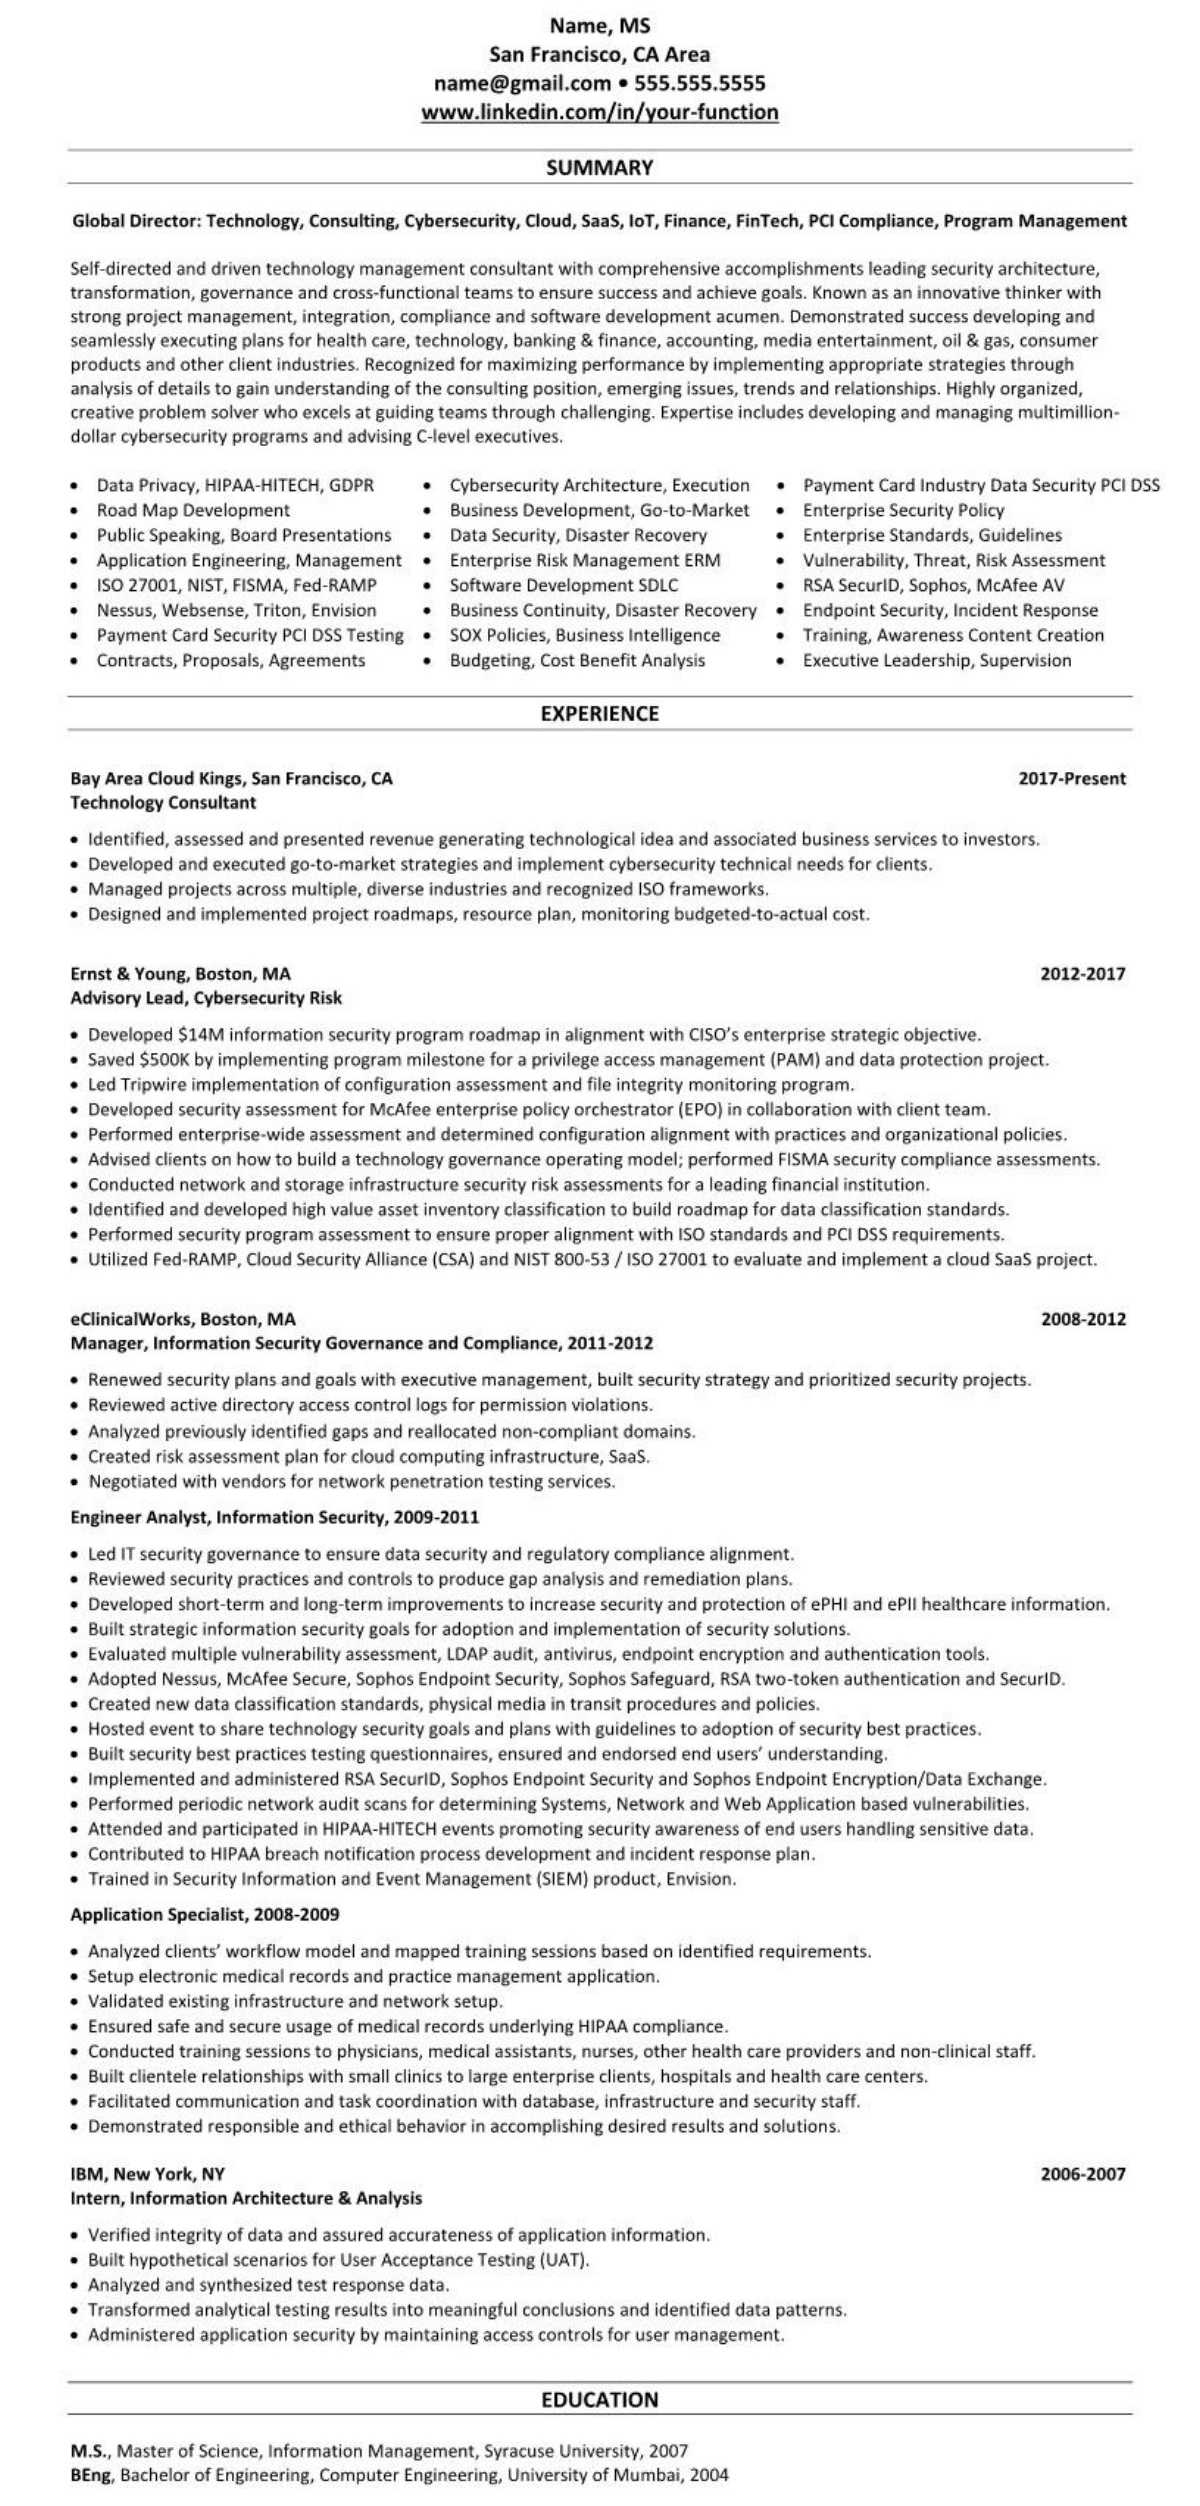 professional executive resume example cloud computing network technology 2303